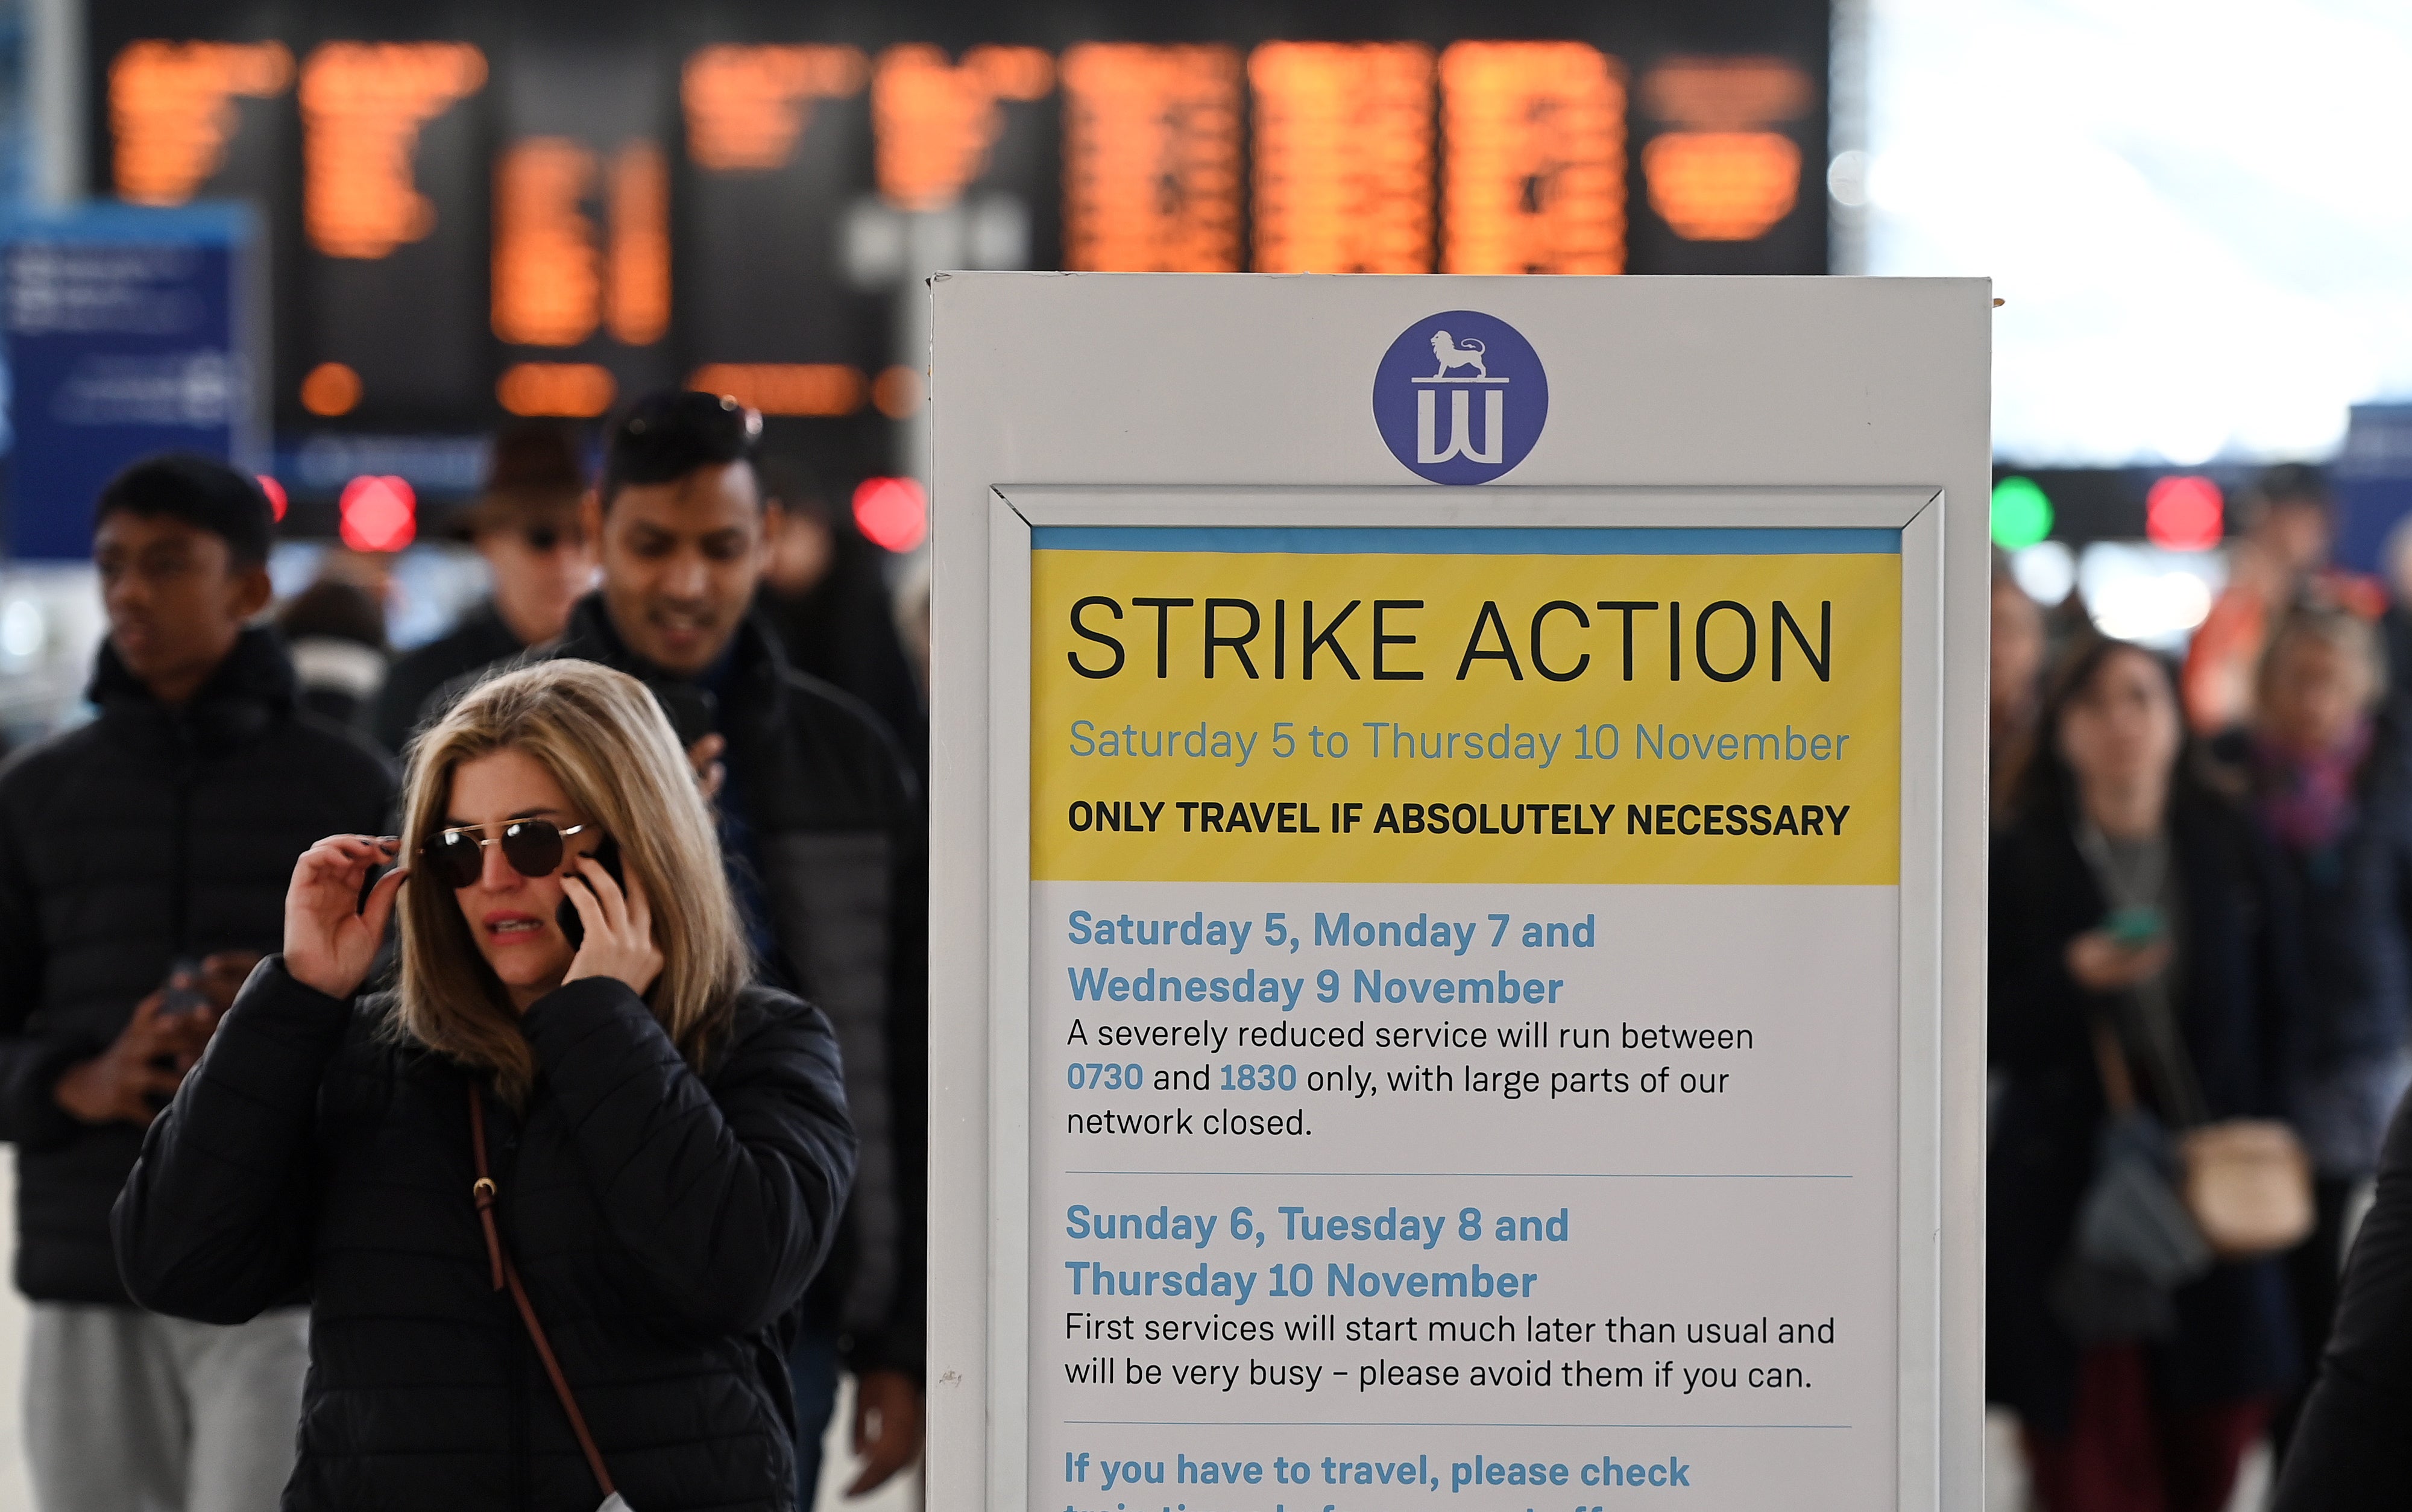 The RMT union has recently called off a series of strikes planned for November